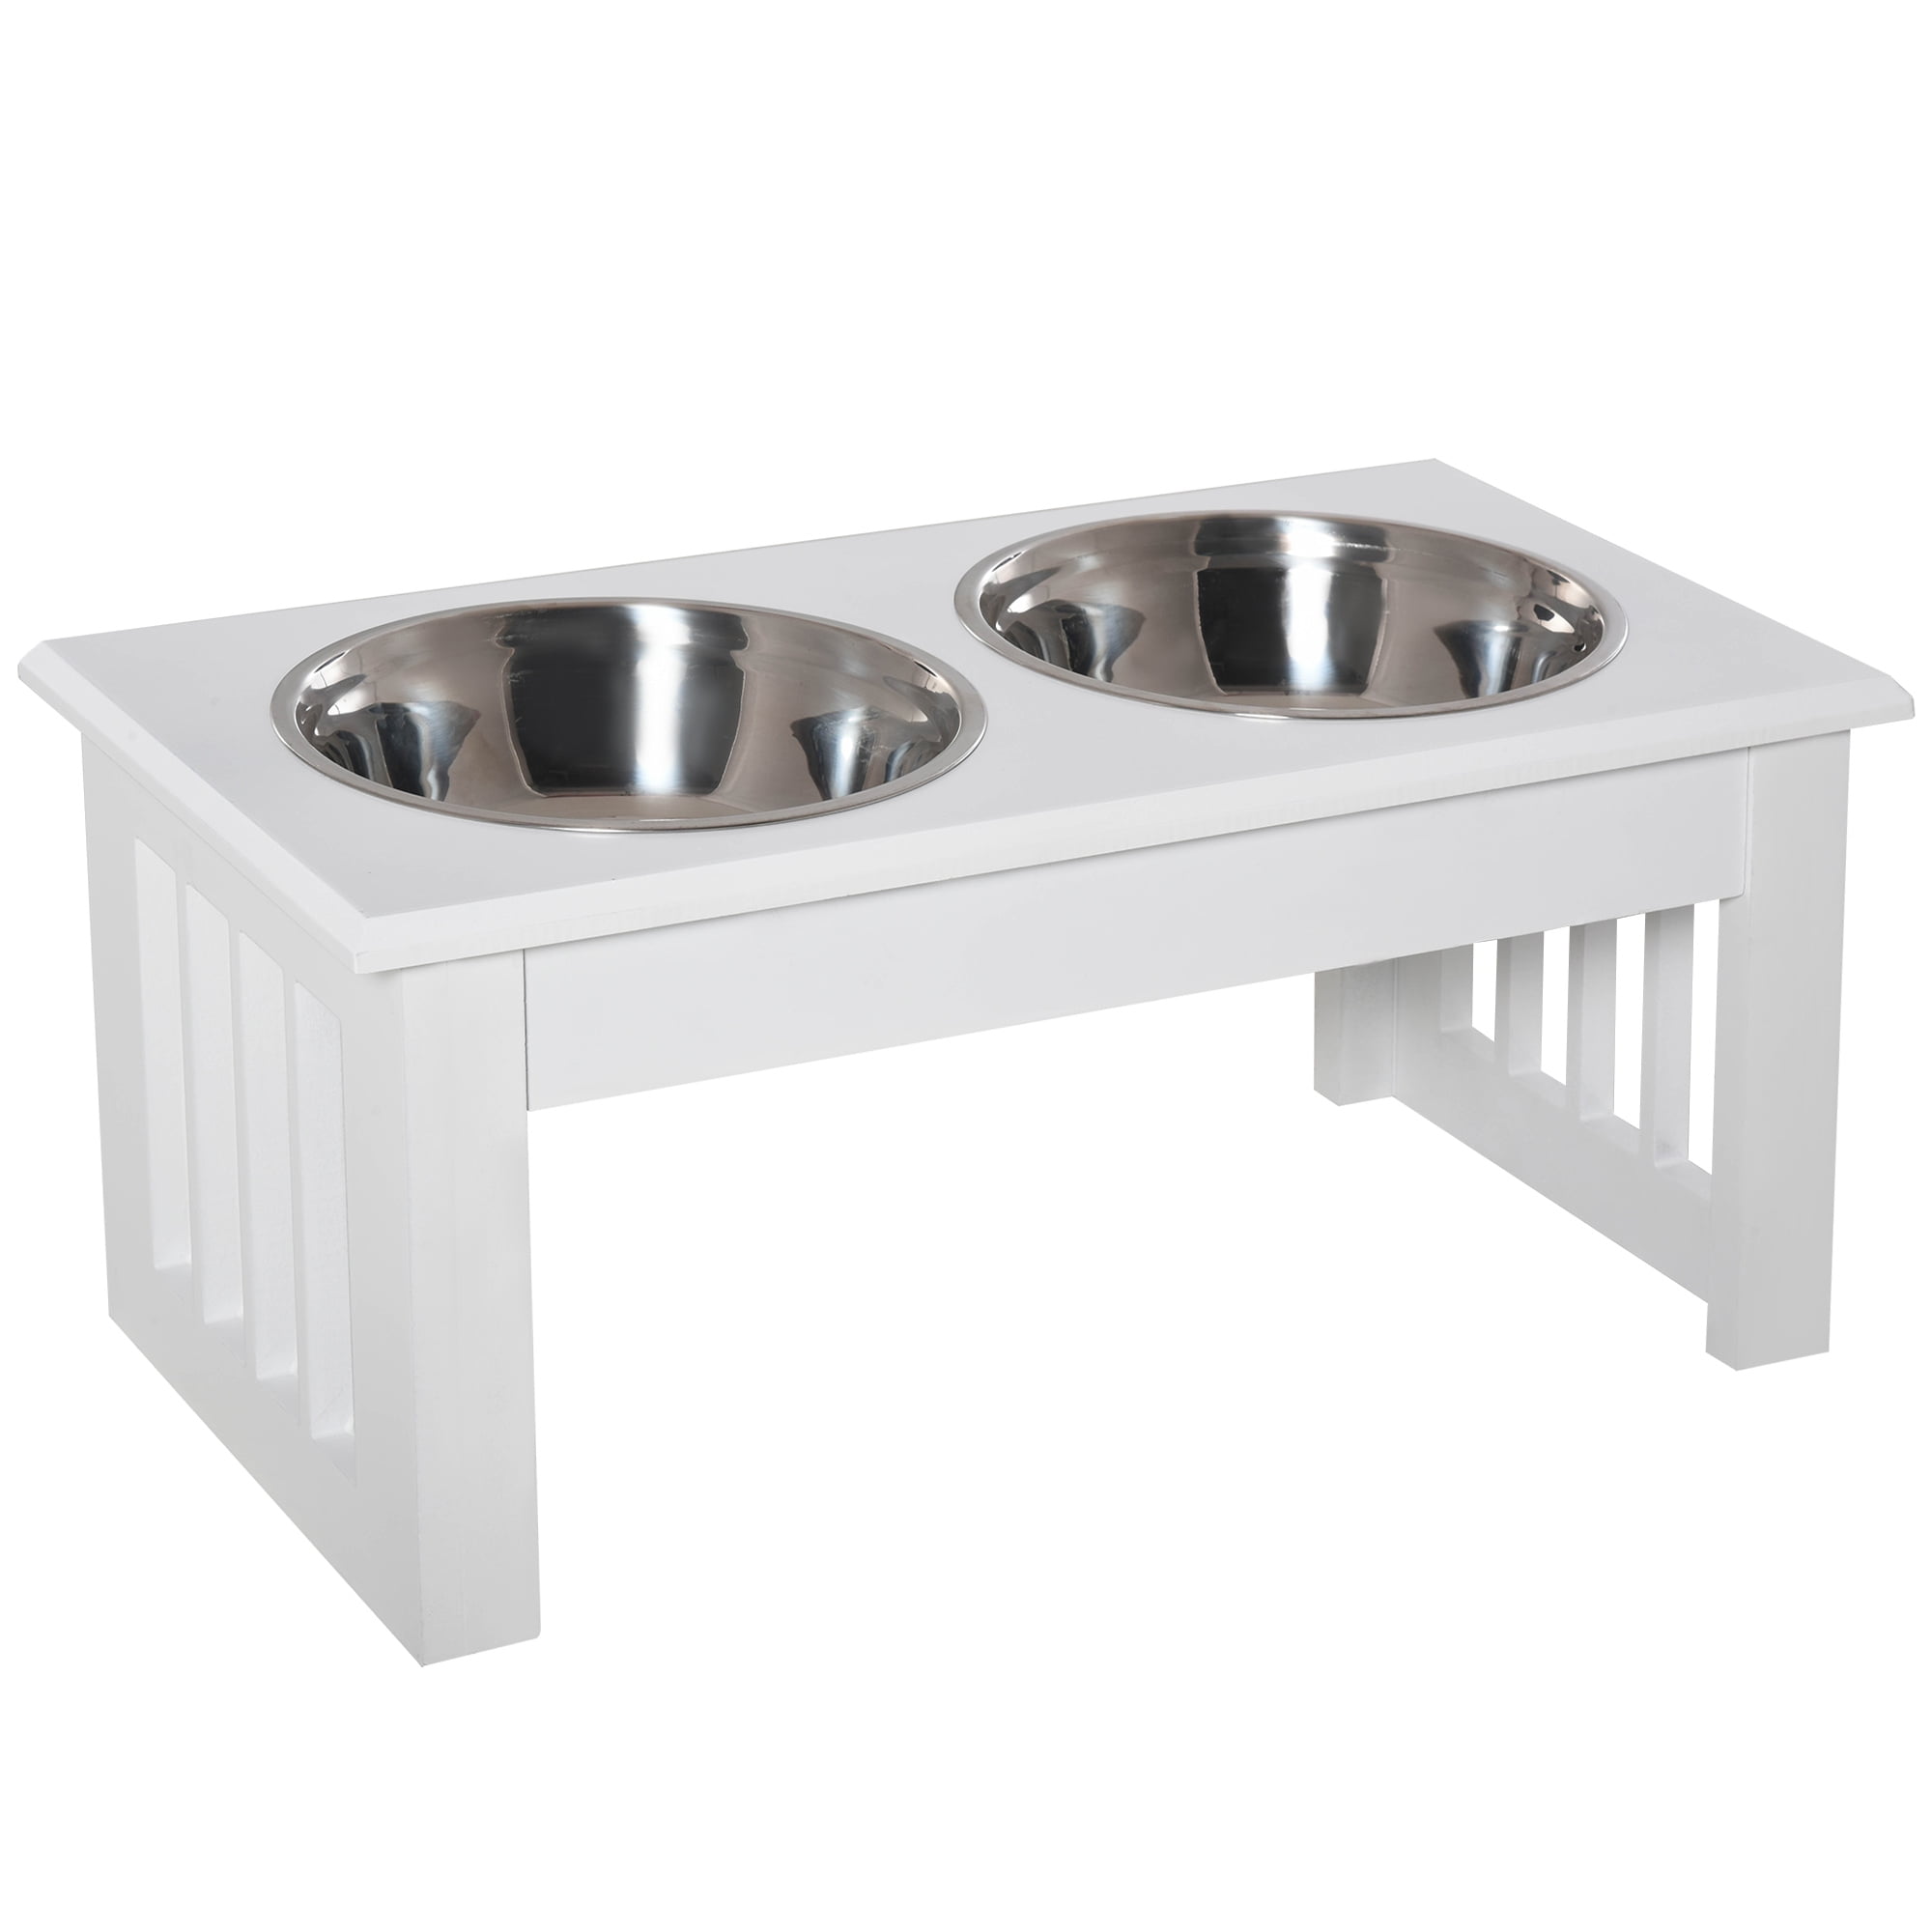 Pet Supplies : Dogit Elevated Dog Bowl, Stainless Steel Dog Food and Water  Bowl for Small Dogs, White, 73745 : Pet Bowls 